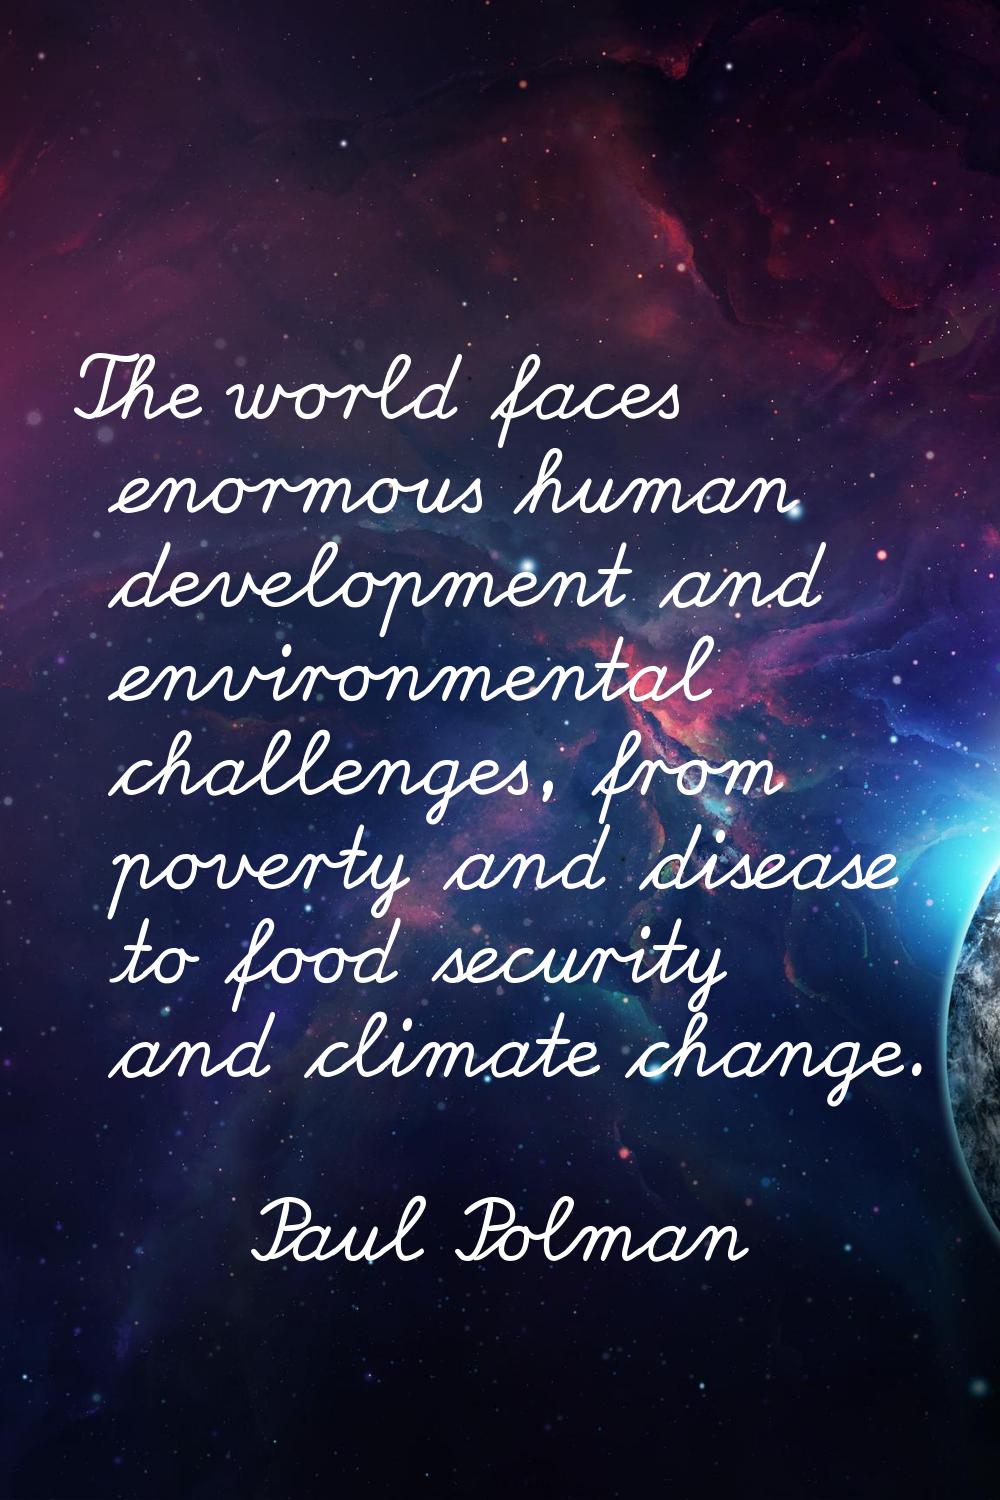 The world faces enormous human development and environmental challenges, from poverty and disease t